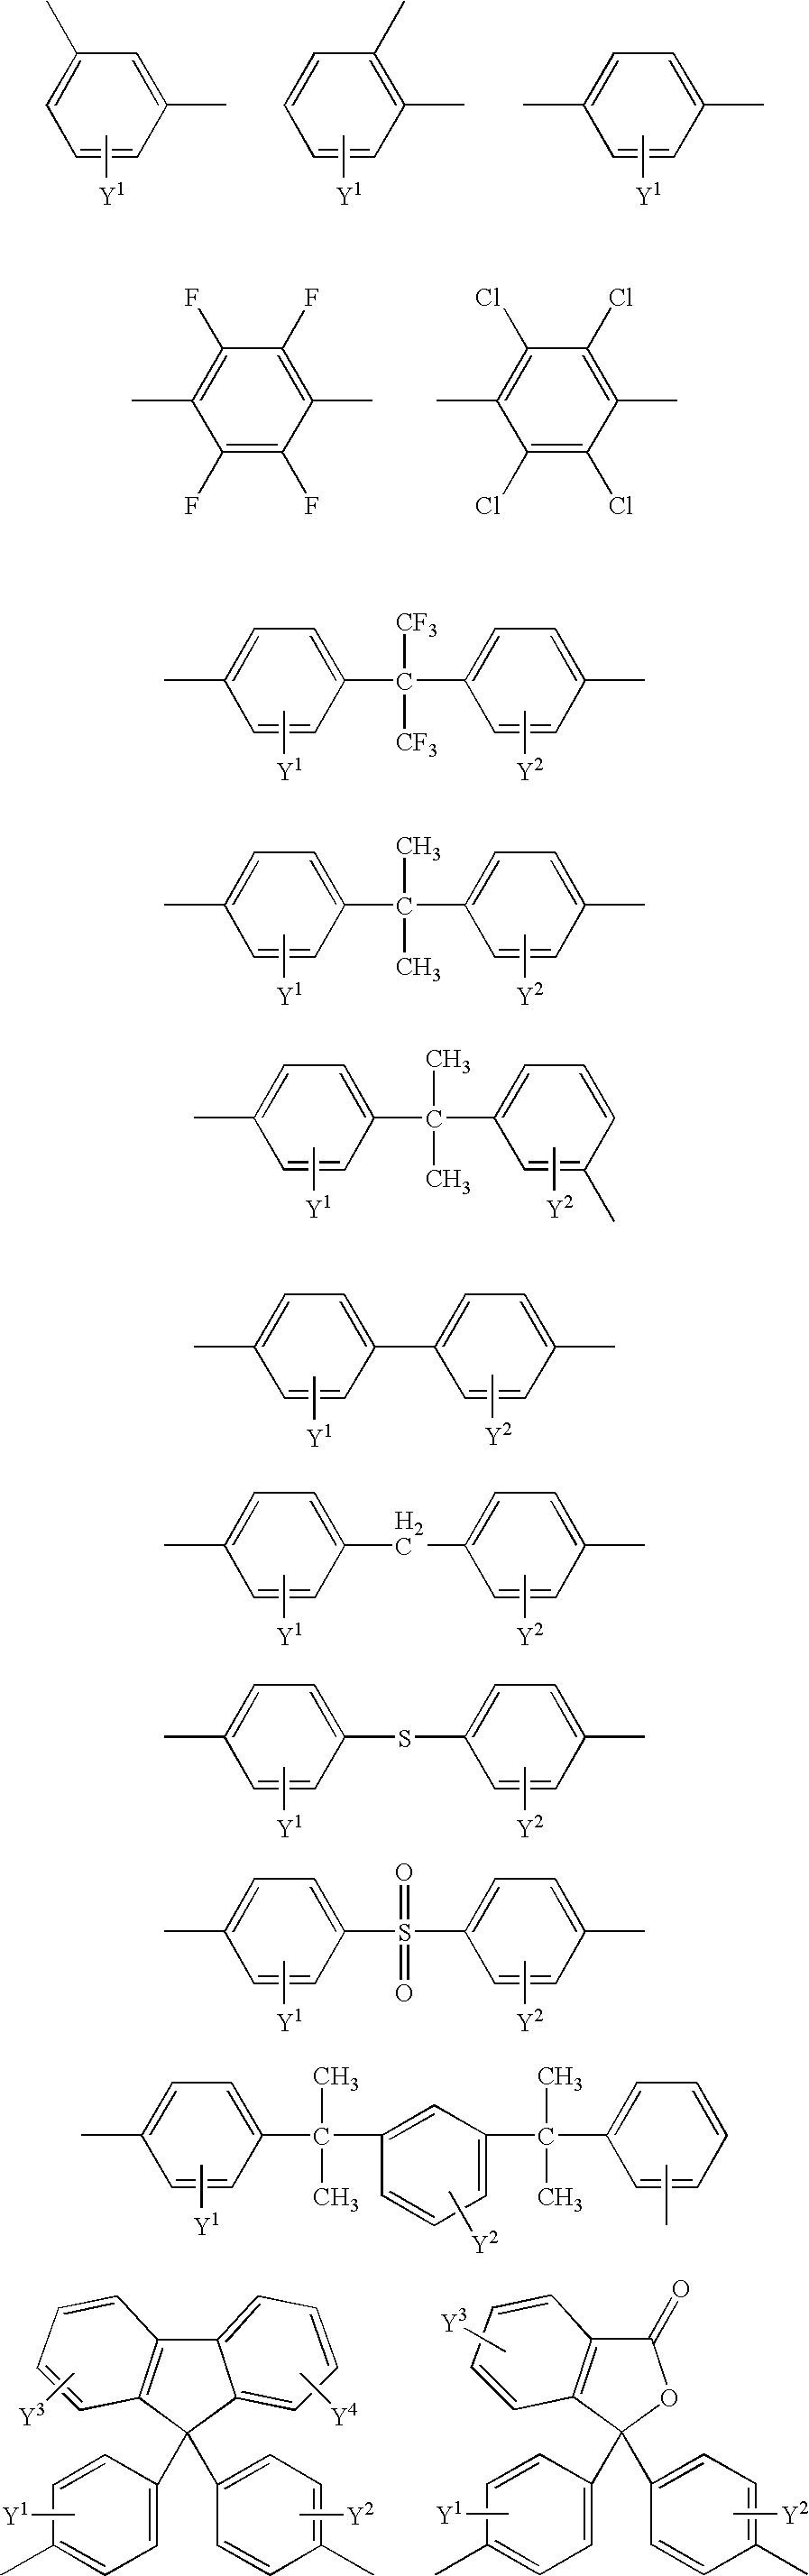 Resin composition for composite dielectric material, composite dielectric material and electric circuit board using ths same